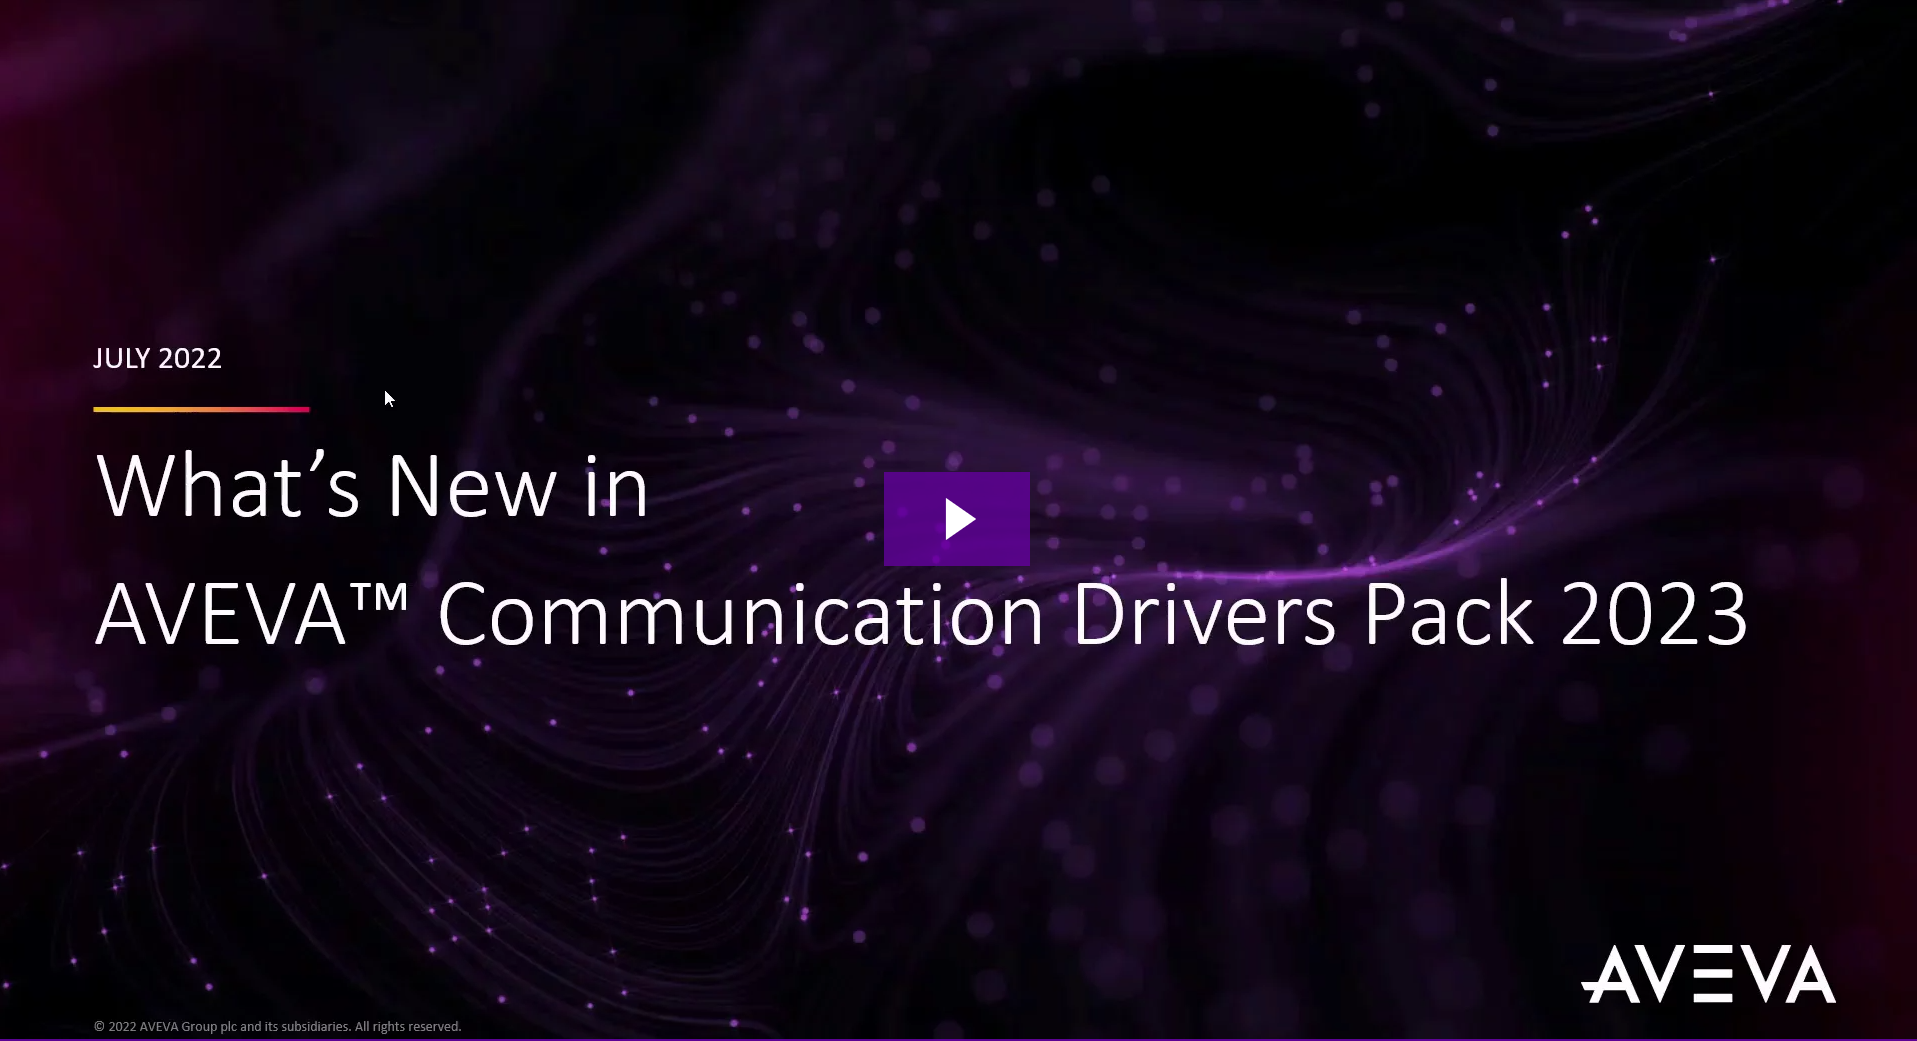 What's new in AVEVA Communication Drivers Pack 2023